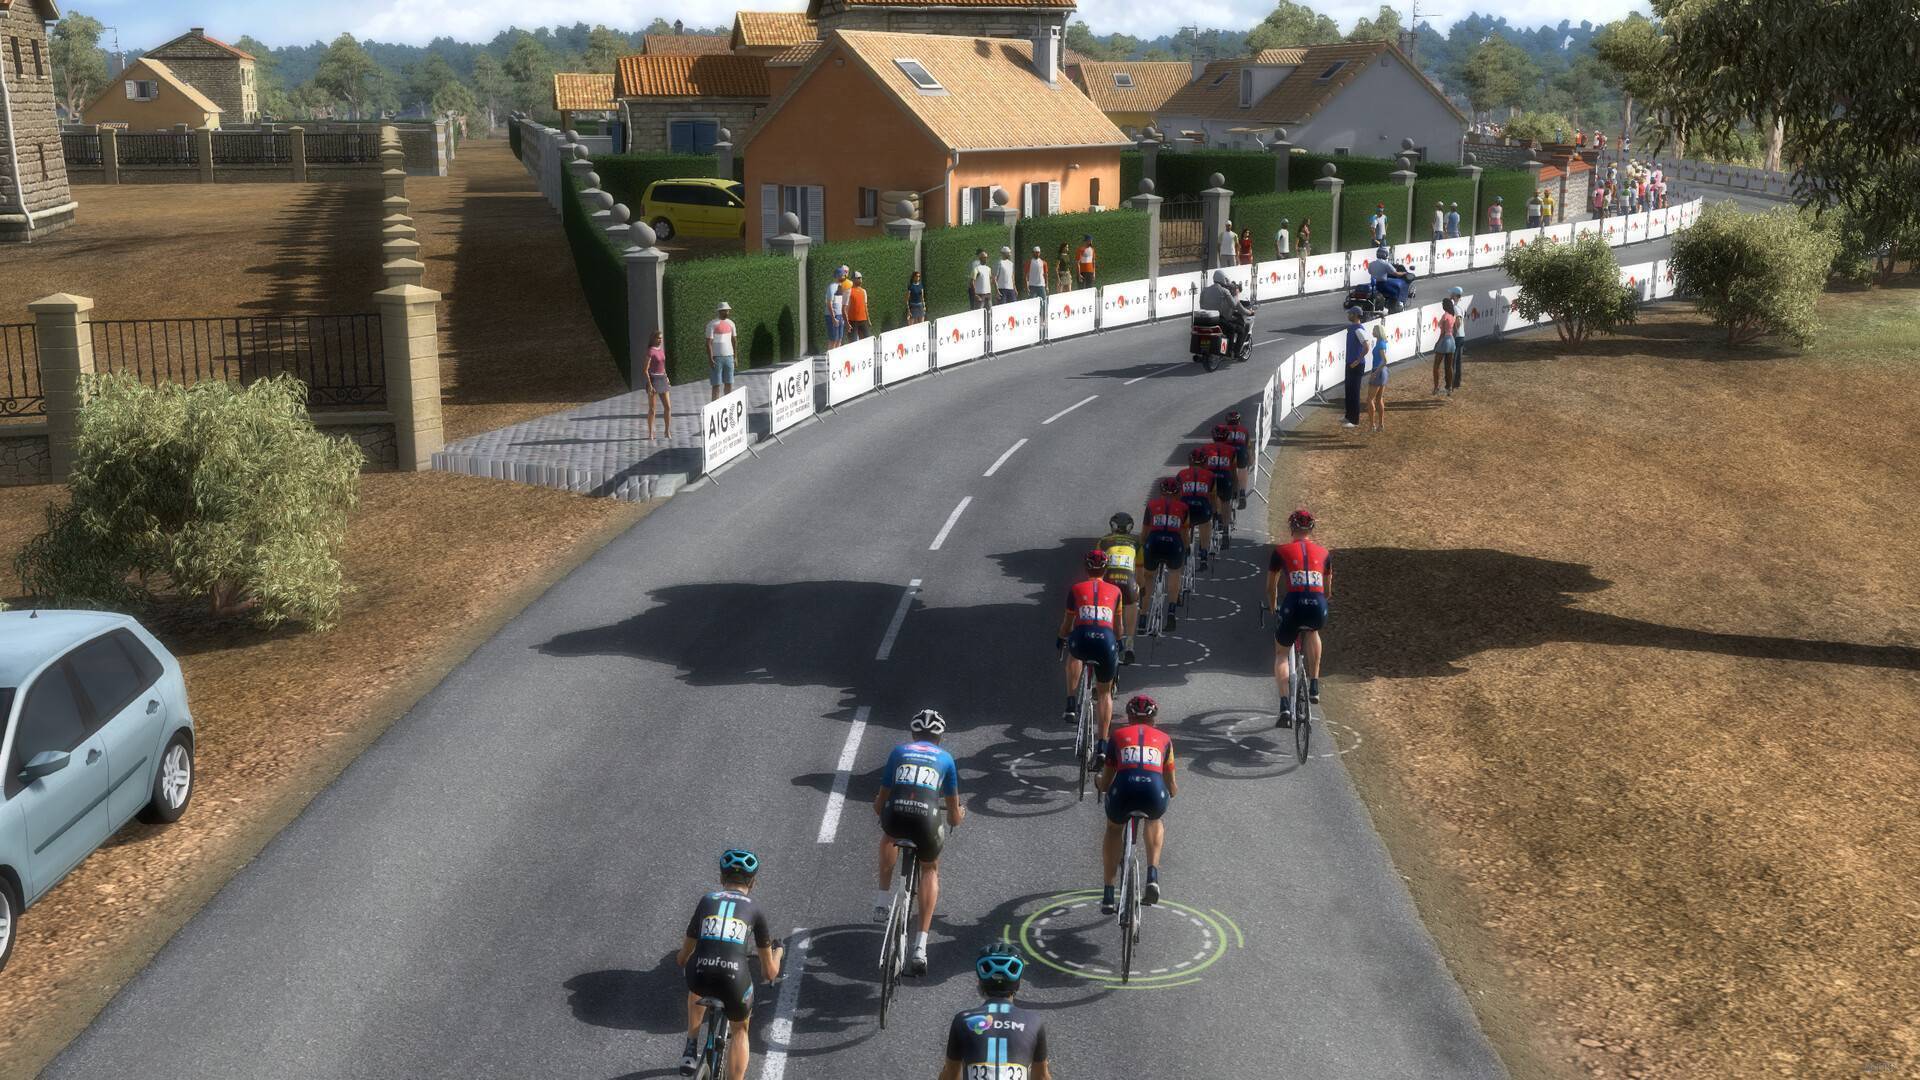 Pro Cycling Manager 2020 Steam CD Key